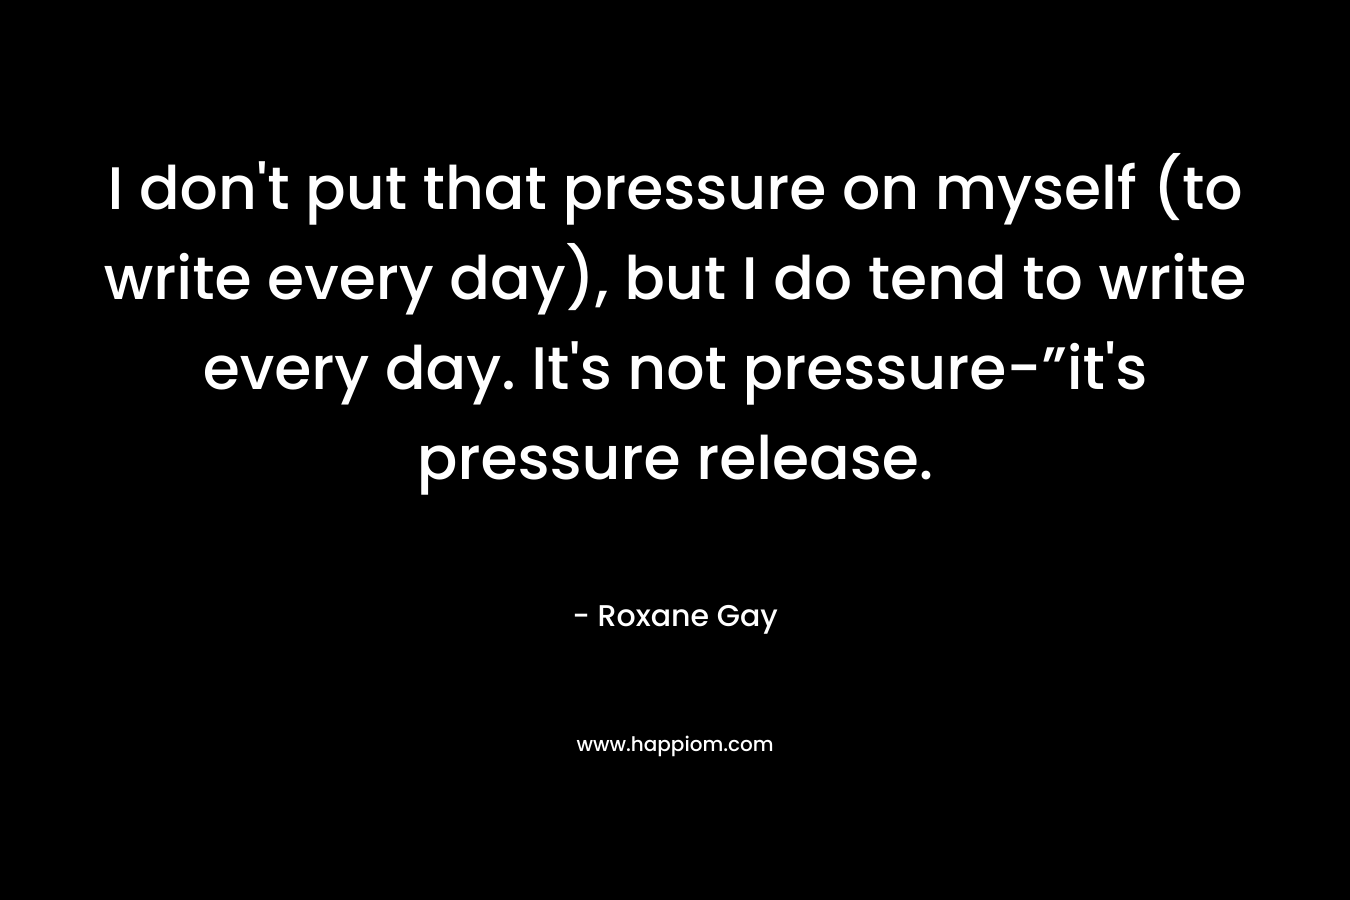 I don't put that pressure on myself (to write every day), but I do tend to write every day. It's not pressure-”it's pressure release.